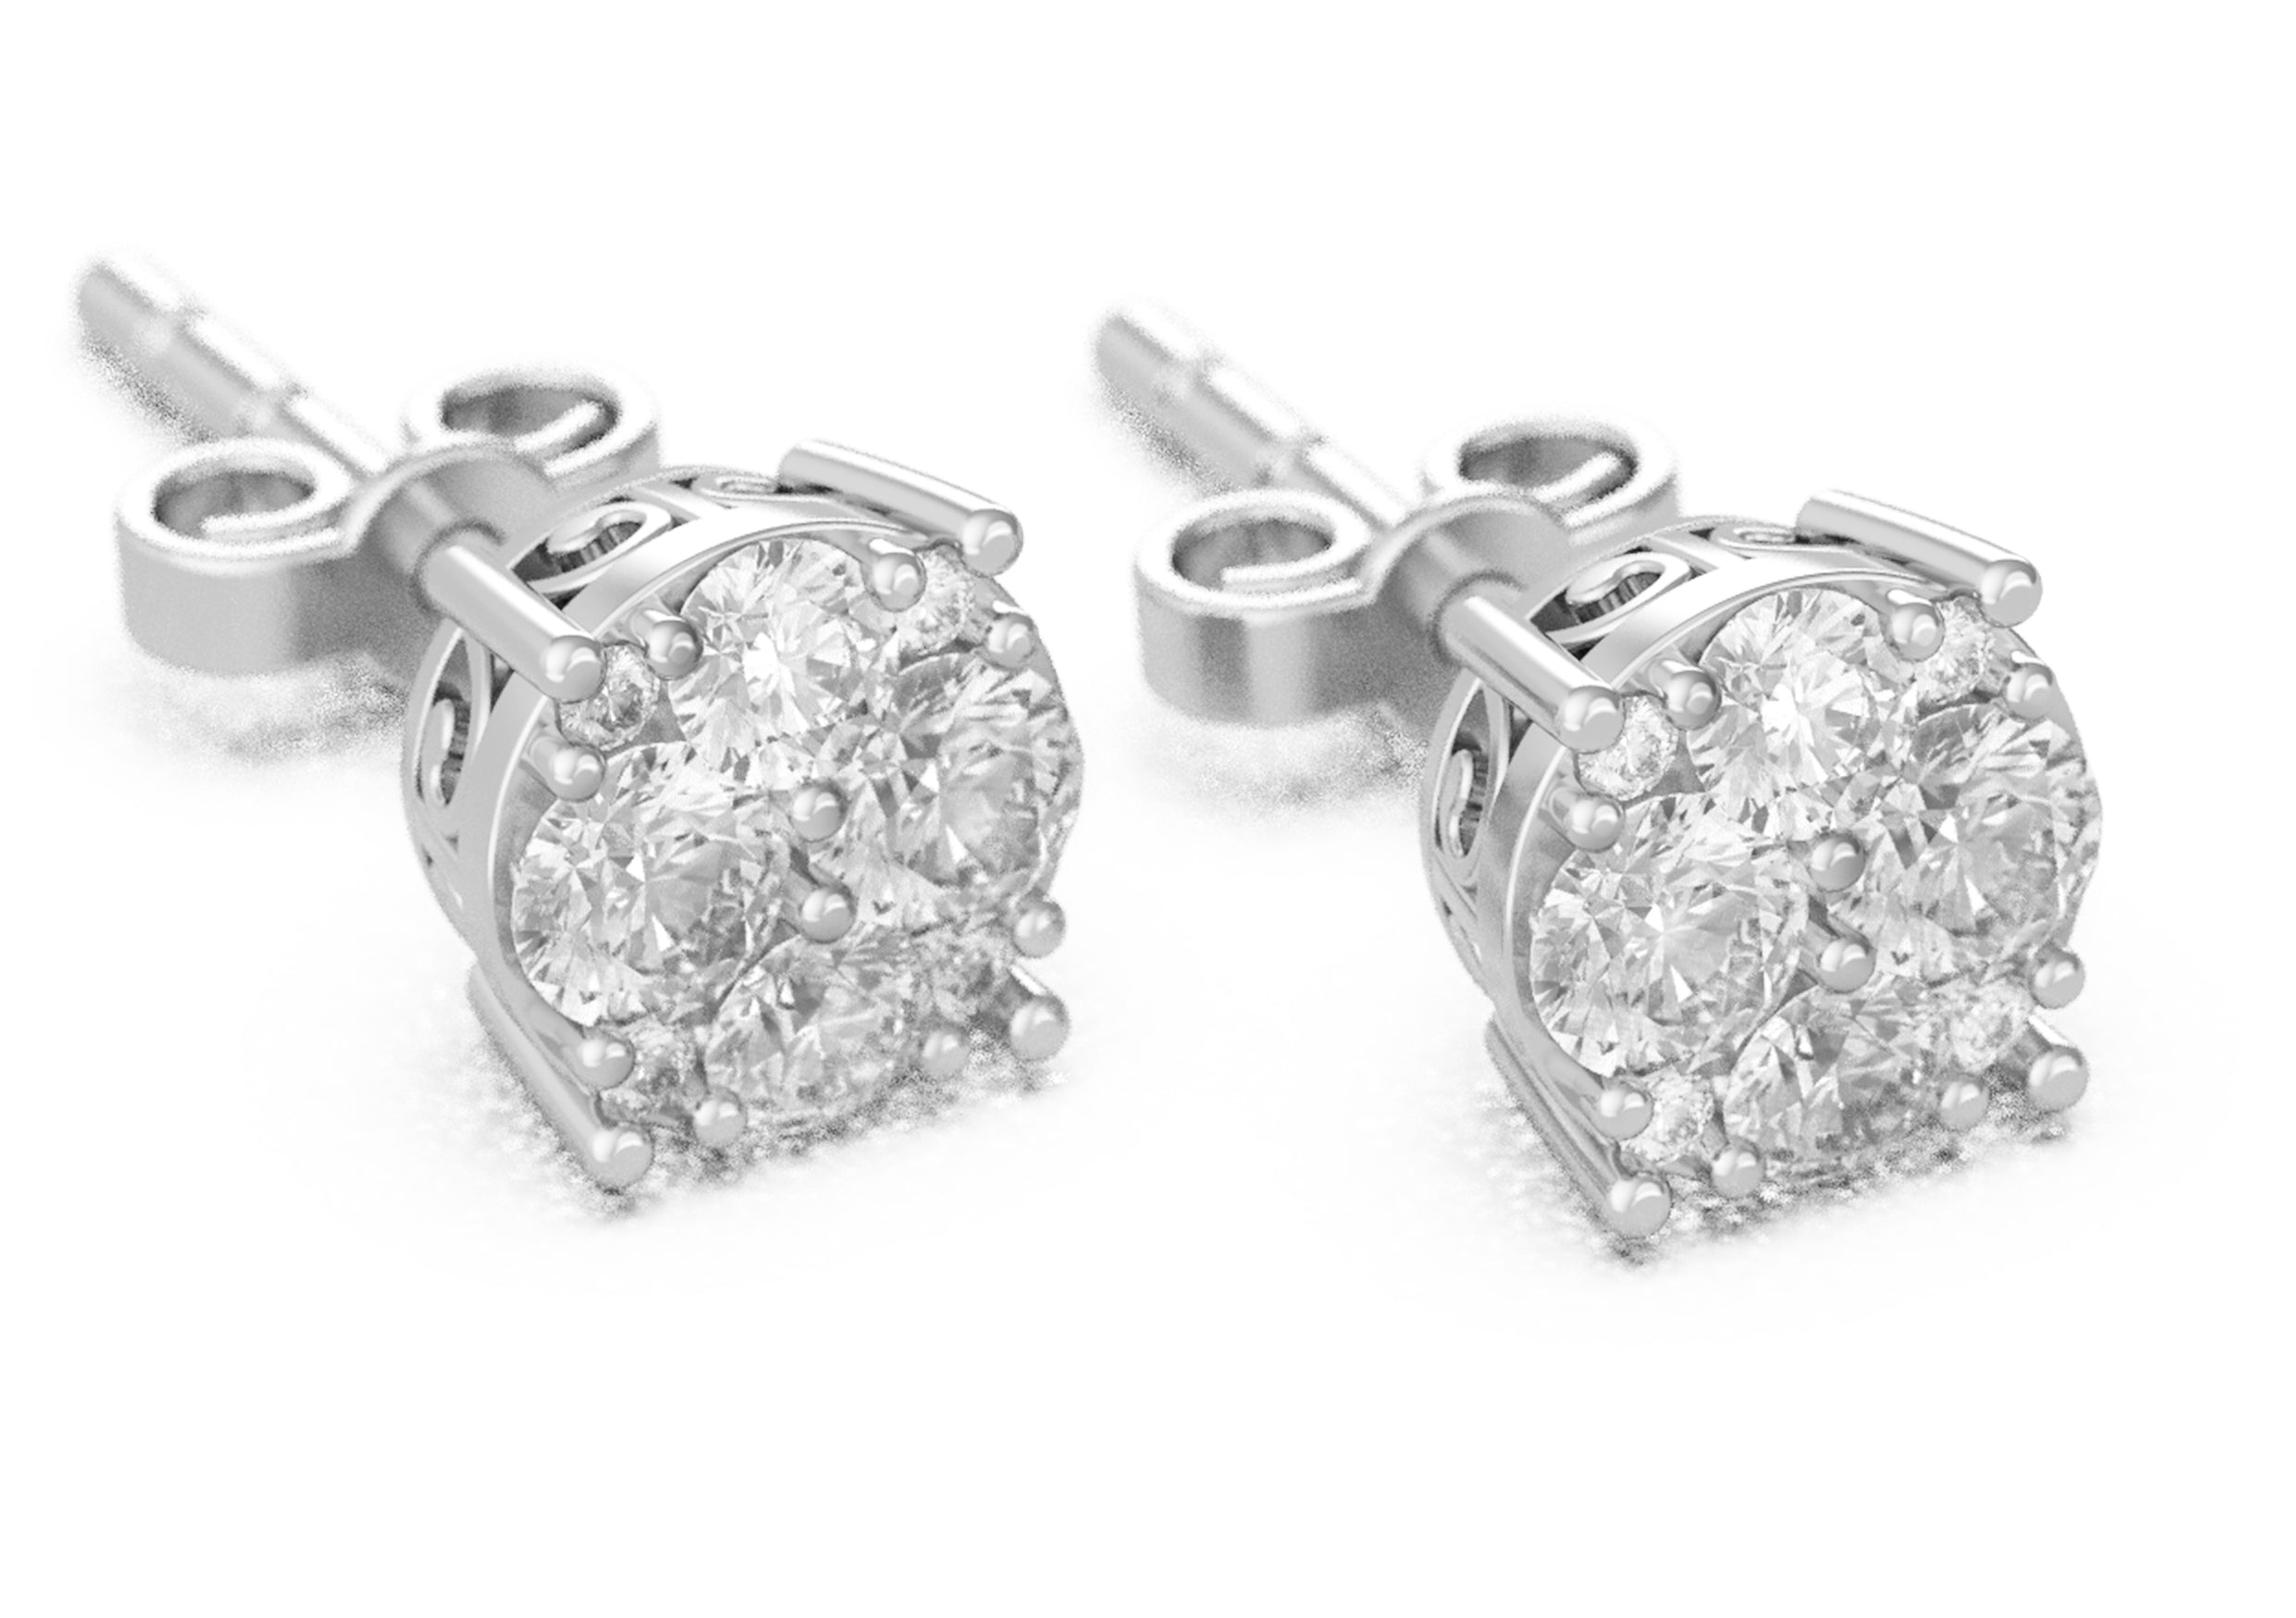 Image of ID 1 10 Ct Natural Diamond Stud Earrings Set in Sterling Silver